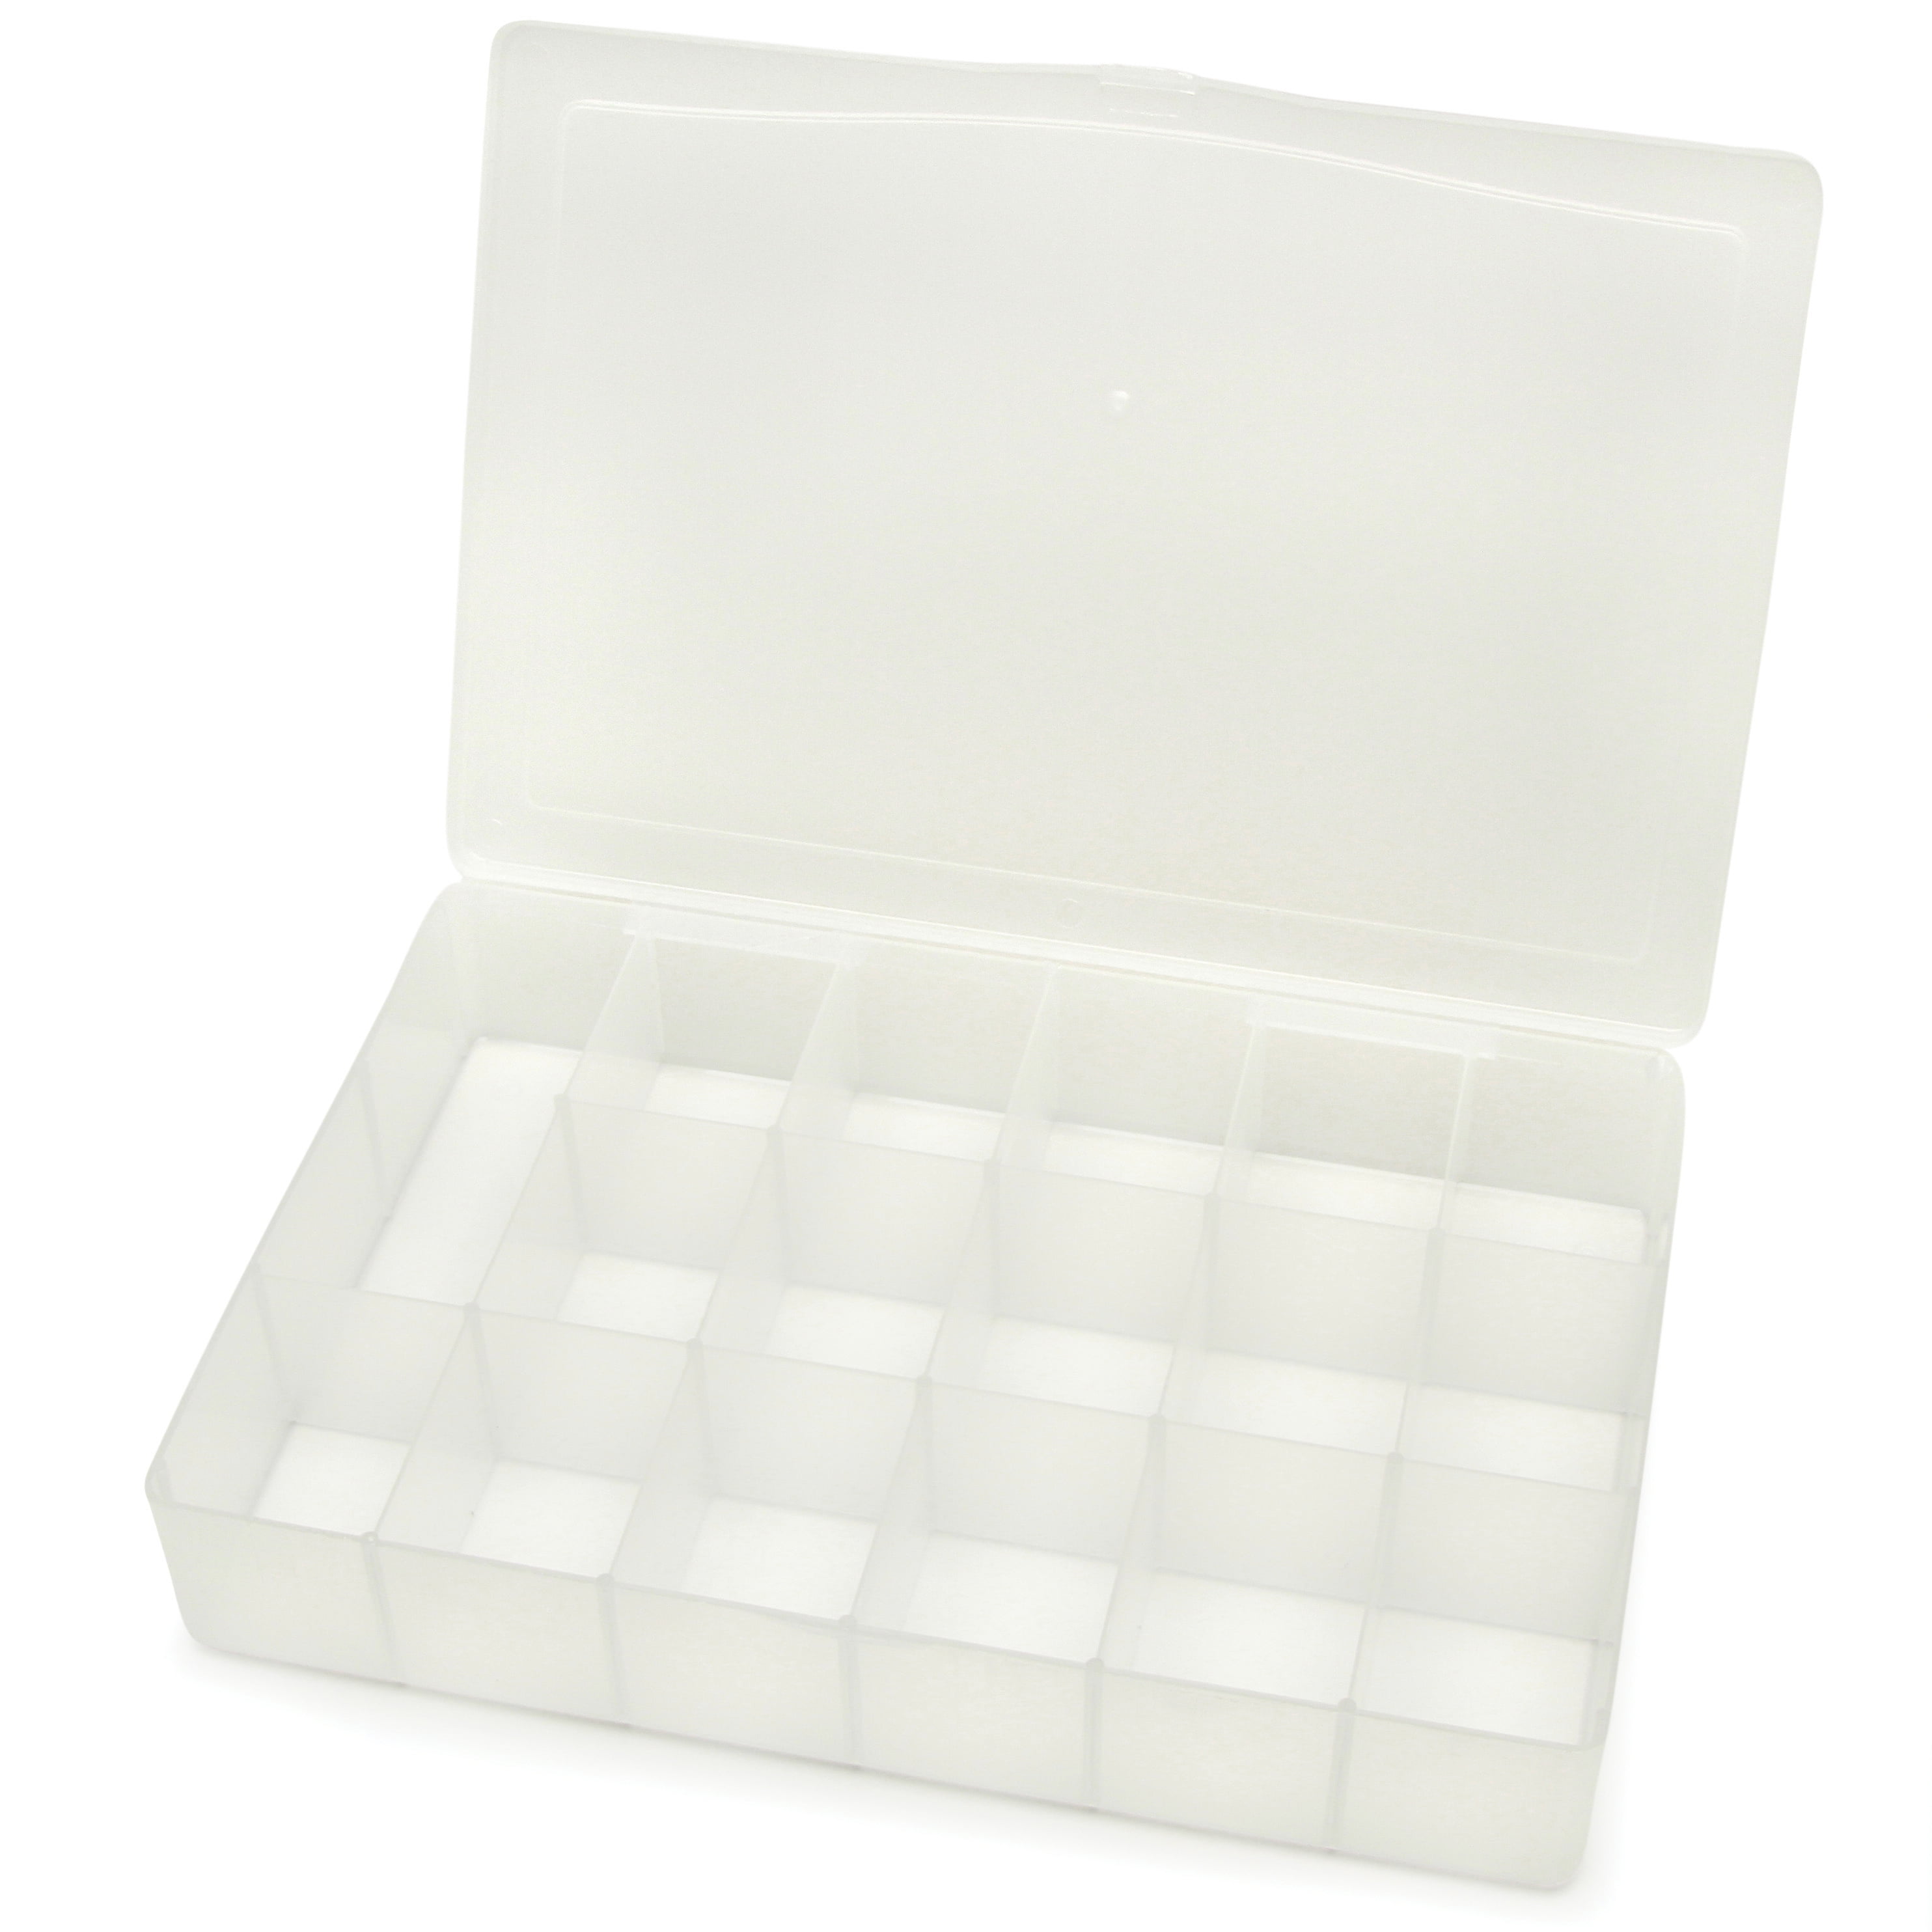 1pc Clear Organizer Plastic Jewelry Beads Storage Box Container 18 Compartments